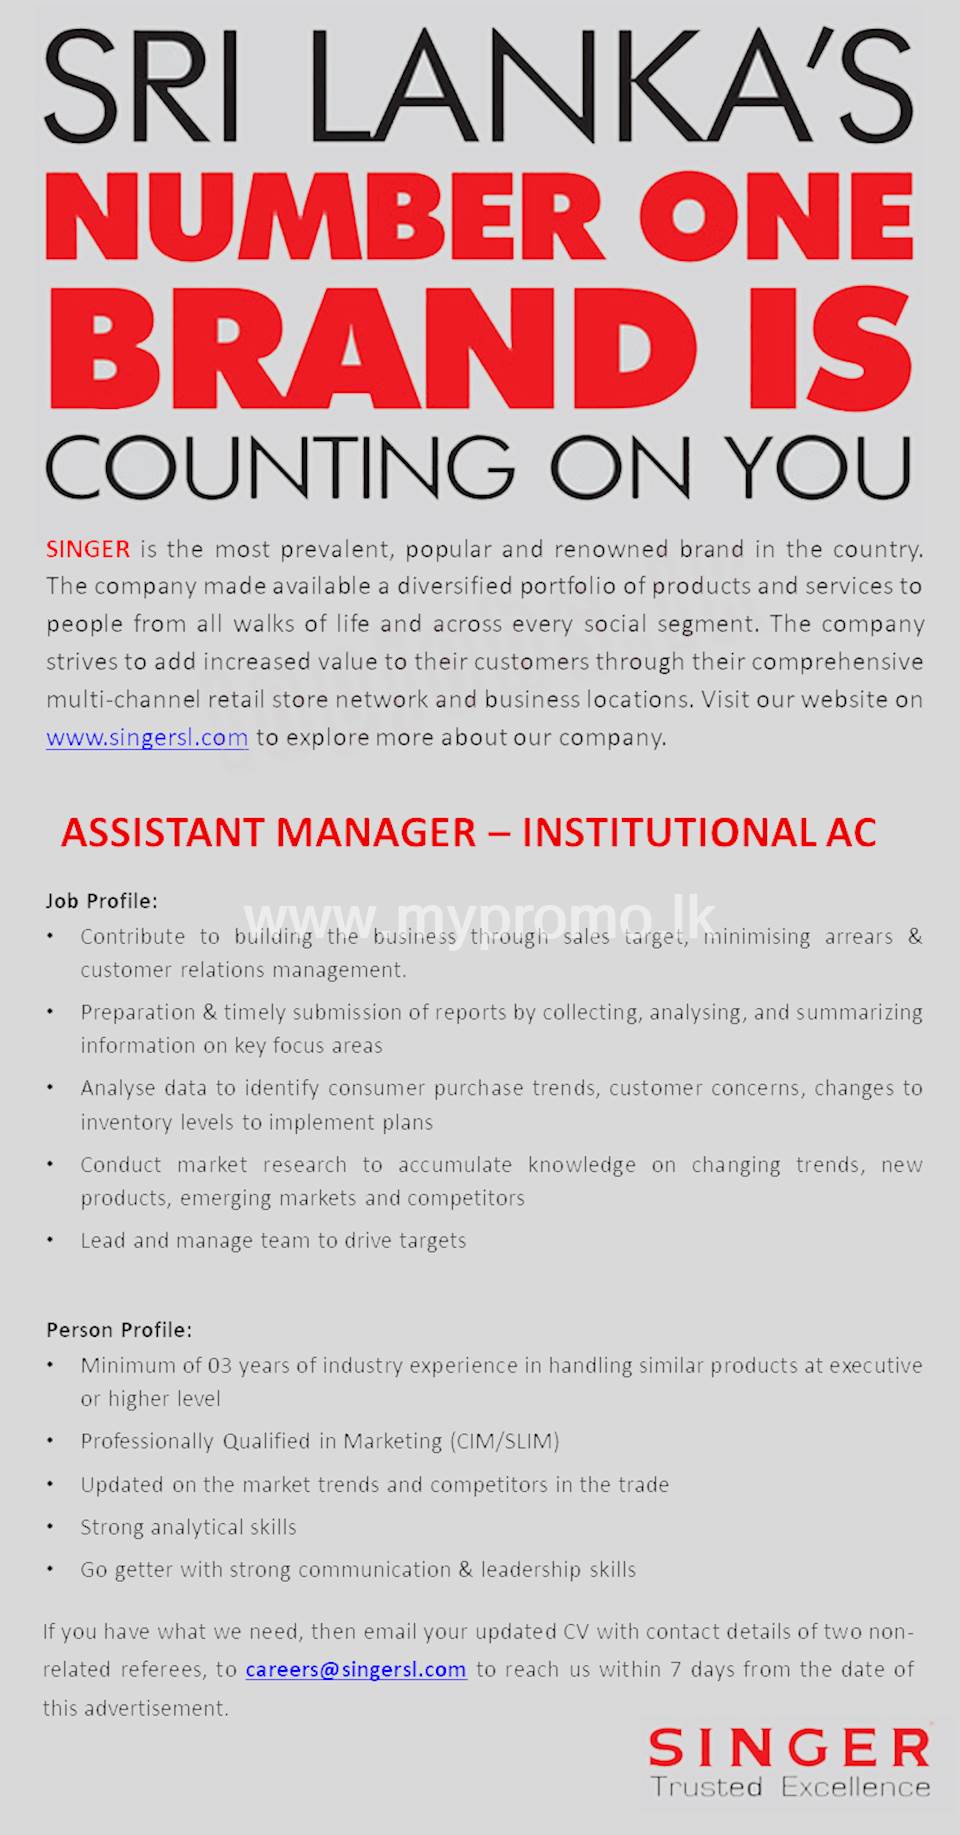 Assistant Manager - Institutional AC